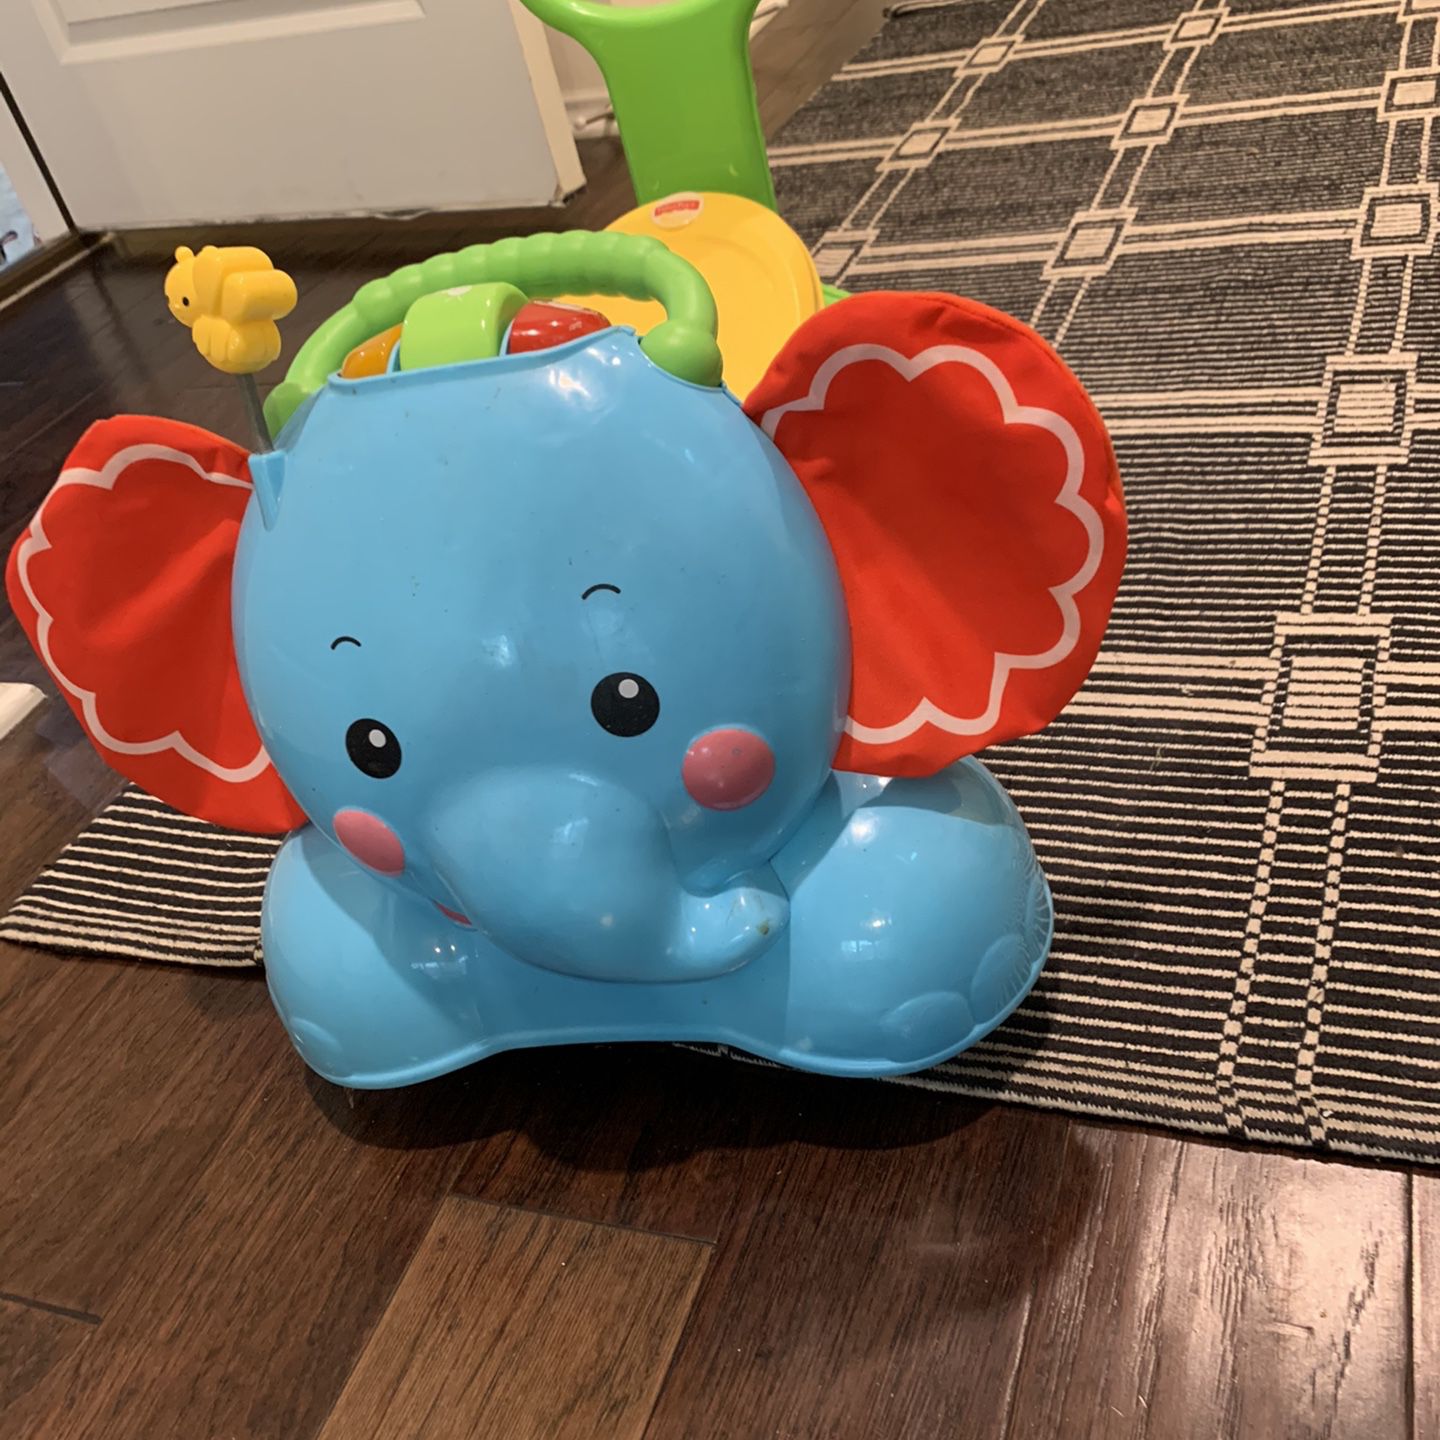 Elephant Fisher Price Ride On 3 In 1